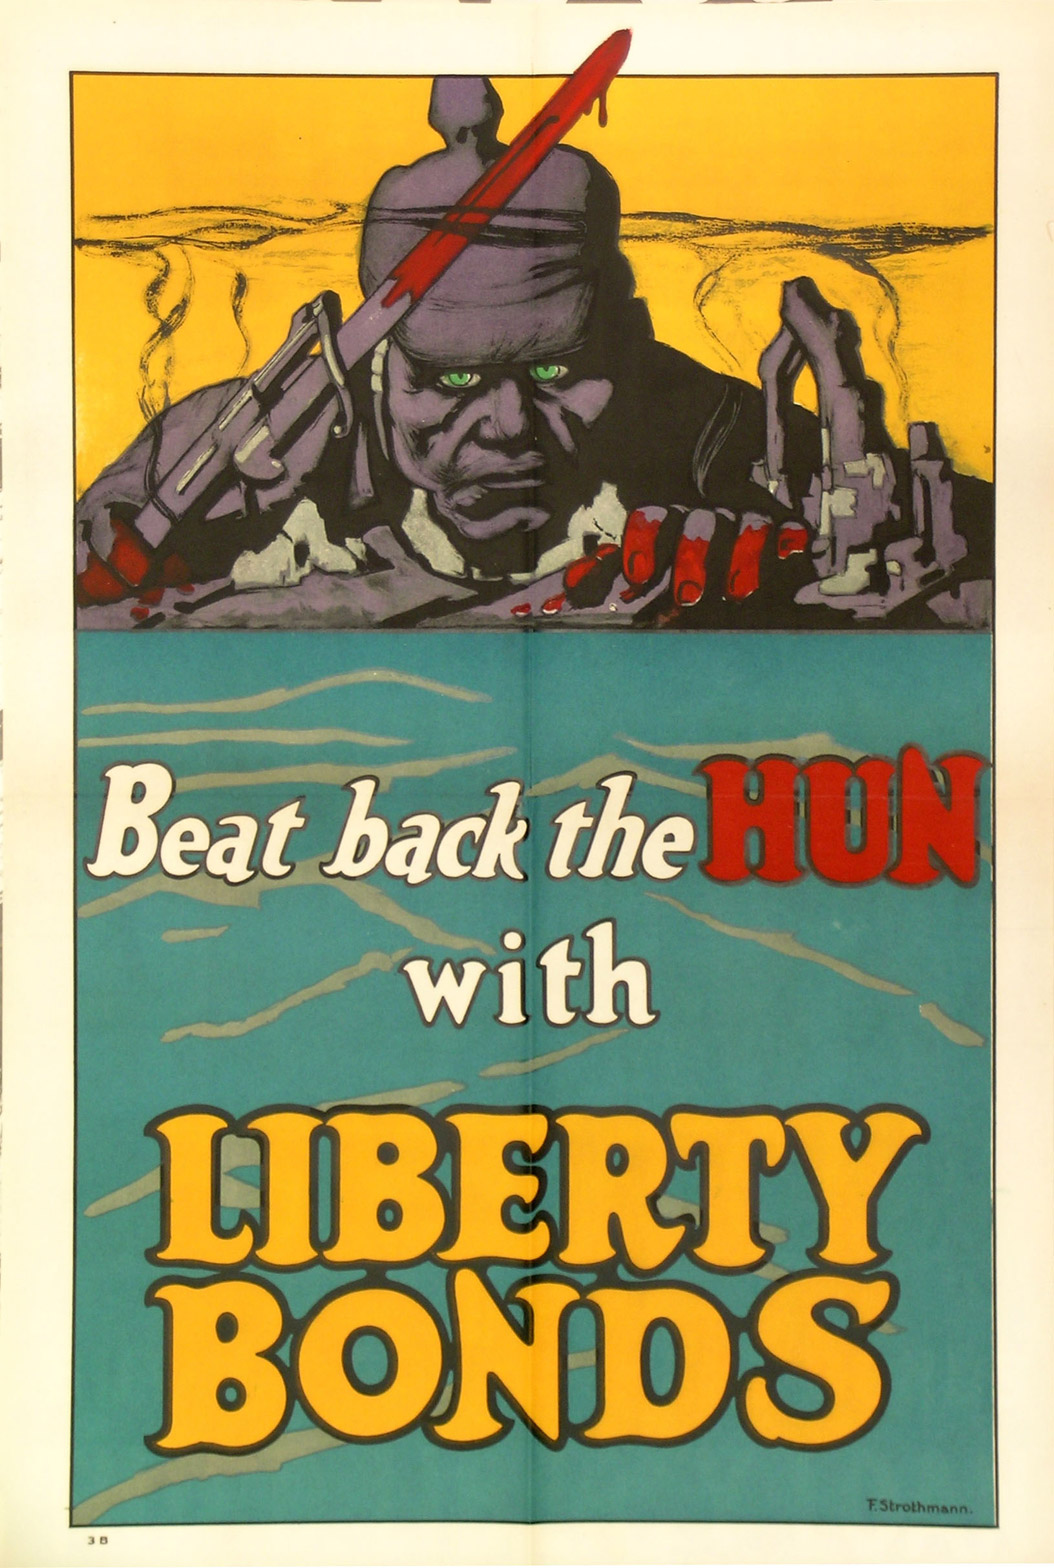 Posters such as this were used to help sell Liberty Bonds.